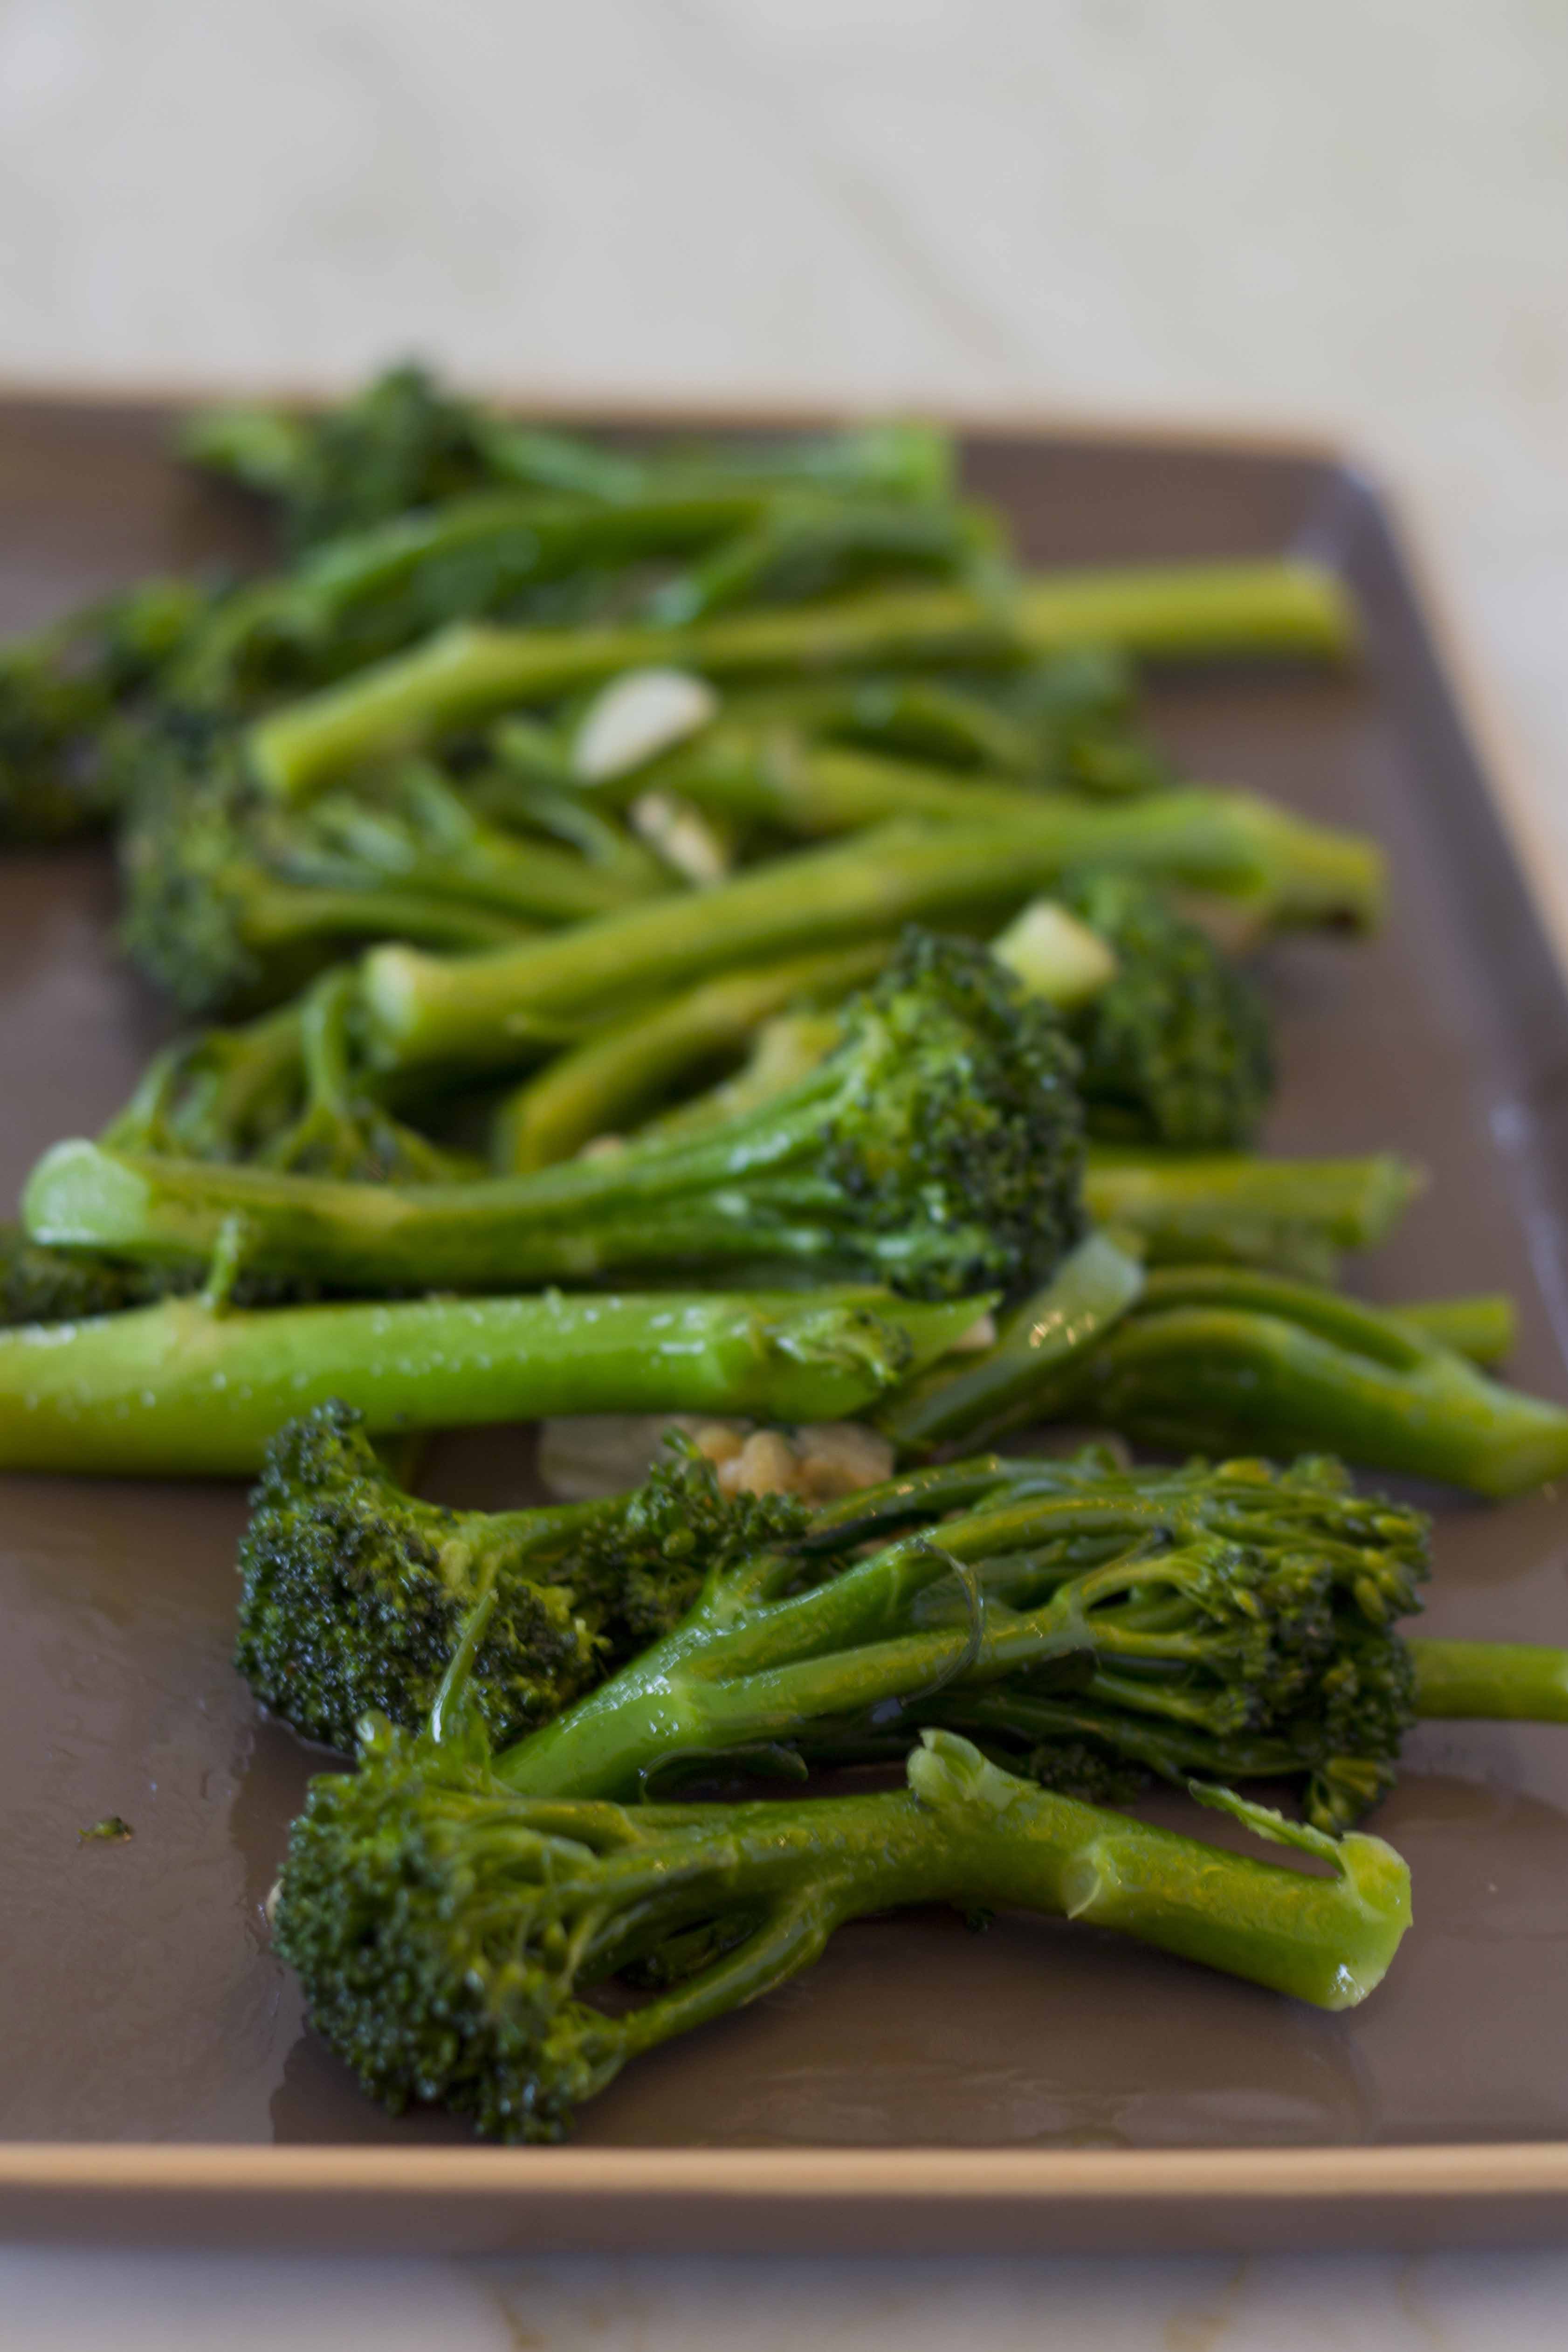 Broccoli flavoured with garlic, anchovy and chilli